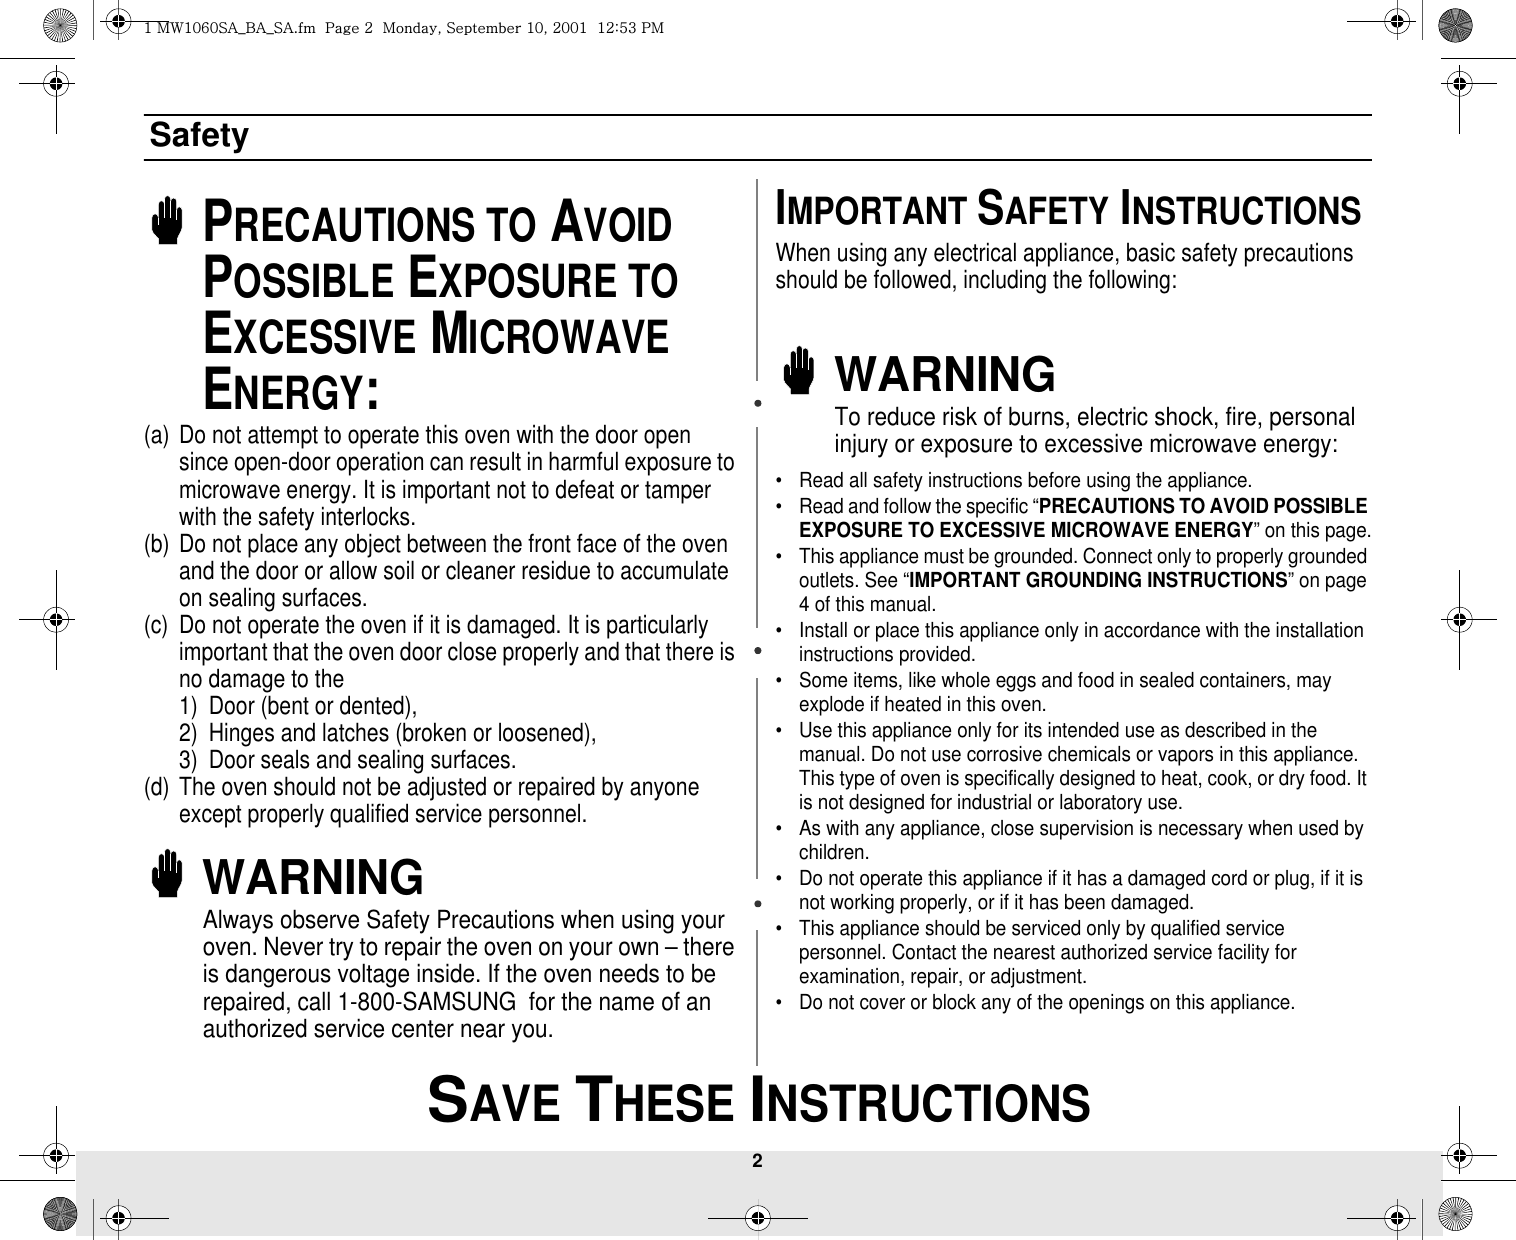 2 SAVE THESE INSTRUCTIONSSafetyPRECAUTIONS TO AVOID POSSIBLE EXPOSURE TO EXCESSIVE MICROWAVE ENERGY:(a) Do not attempt to operate this oven with the door open since open-door operation can result in harmful exposure to microwave energy. It is important not to defeat or tamper with the safety interlocks.(b) Do not place any object between the front face of the oven and the door or allow soil or cleaner residue to accumulate on sealing surfaces.(c) Do not operate the oven if it is damaged. It is particularly important that the oven door close properly and that there is no damage to the 1) Door (bent or dented), 2) Hinges and latches (broken or loosened), 3) Door seals and sealing surfaces.(d) The oven should not be adjusted or repaired by anyone except properly qualified service personnel.WARNINGAlways observe Safety Precautions when using your oven. Never try to repair the oven on your own – there is dangerous voltage inside. If the oven needs to be repaired, call 1-800-SAMSUNG  for the name of an authorized service center near you.IMPORTANT SAFETY INSTRUCTIONSWhen using any electrical appliance, basic safety precautions should be followed, including the following:WARNINGTo reduce risk of burns, electric shock, fire, personal injury or exposure to excessive microwave energy:• Read all safety instructions before using the appliance.• Read and follow the specific “PRECAUTIONS TO AVOID POSSIBLE EXPOSURE TO EXCESSIVE MICROWAVE ENERGY” on this page.• This appliance must be grounded. Connect only to properly grounded outlets. See “IMPORTANT GROUNDING INSTRUCTIONS” on page 4 of this manual. • Install or place this appliance only in accordance with the installation instructions provided.• Some items, like whole eggs and food in sealed containers, may explode if heated in this oven.• Use this appliance only for its intended use as described in the manual. Do not use corrosive chemicals or vapors in this appliance. This type of oven is specifically designed to heat, cook, or dry food. It is not designed for industrial or laboratory use.• As with any appliance, close supervision is necessary when used by children.• Do not operate this appliance if it has a damaged cord or plug, if it is not working properly, or if it has been damaged.• This appliance should be serviced only by qualified service personnel. Contact the nearest authorized service facility for examination, repair, or adjustment.• Do not cover or block any of the openings on this appliance.XGt~XW]WzhihzhUGGwGYGGtSGzGXWSGYWWXGGXYa\ZGwt